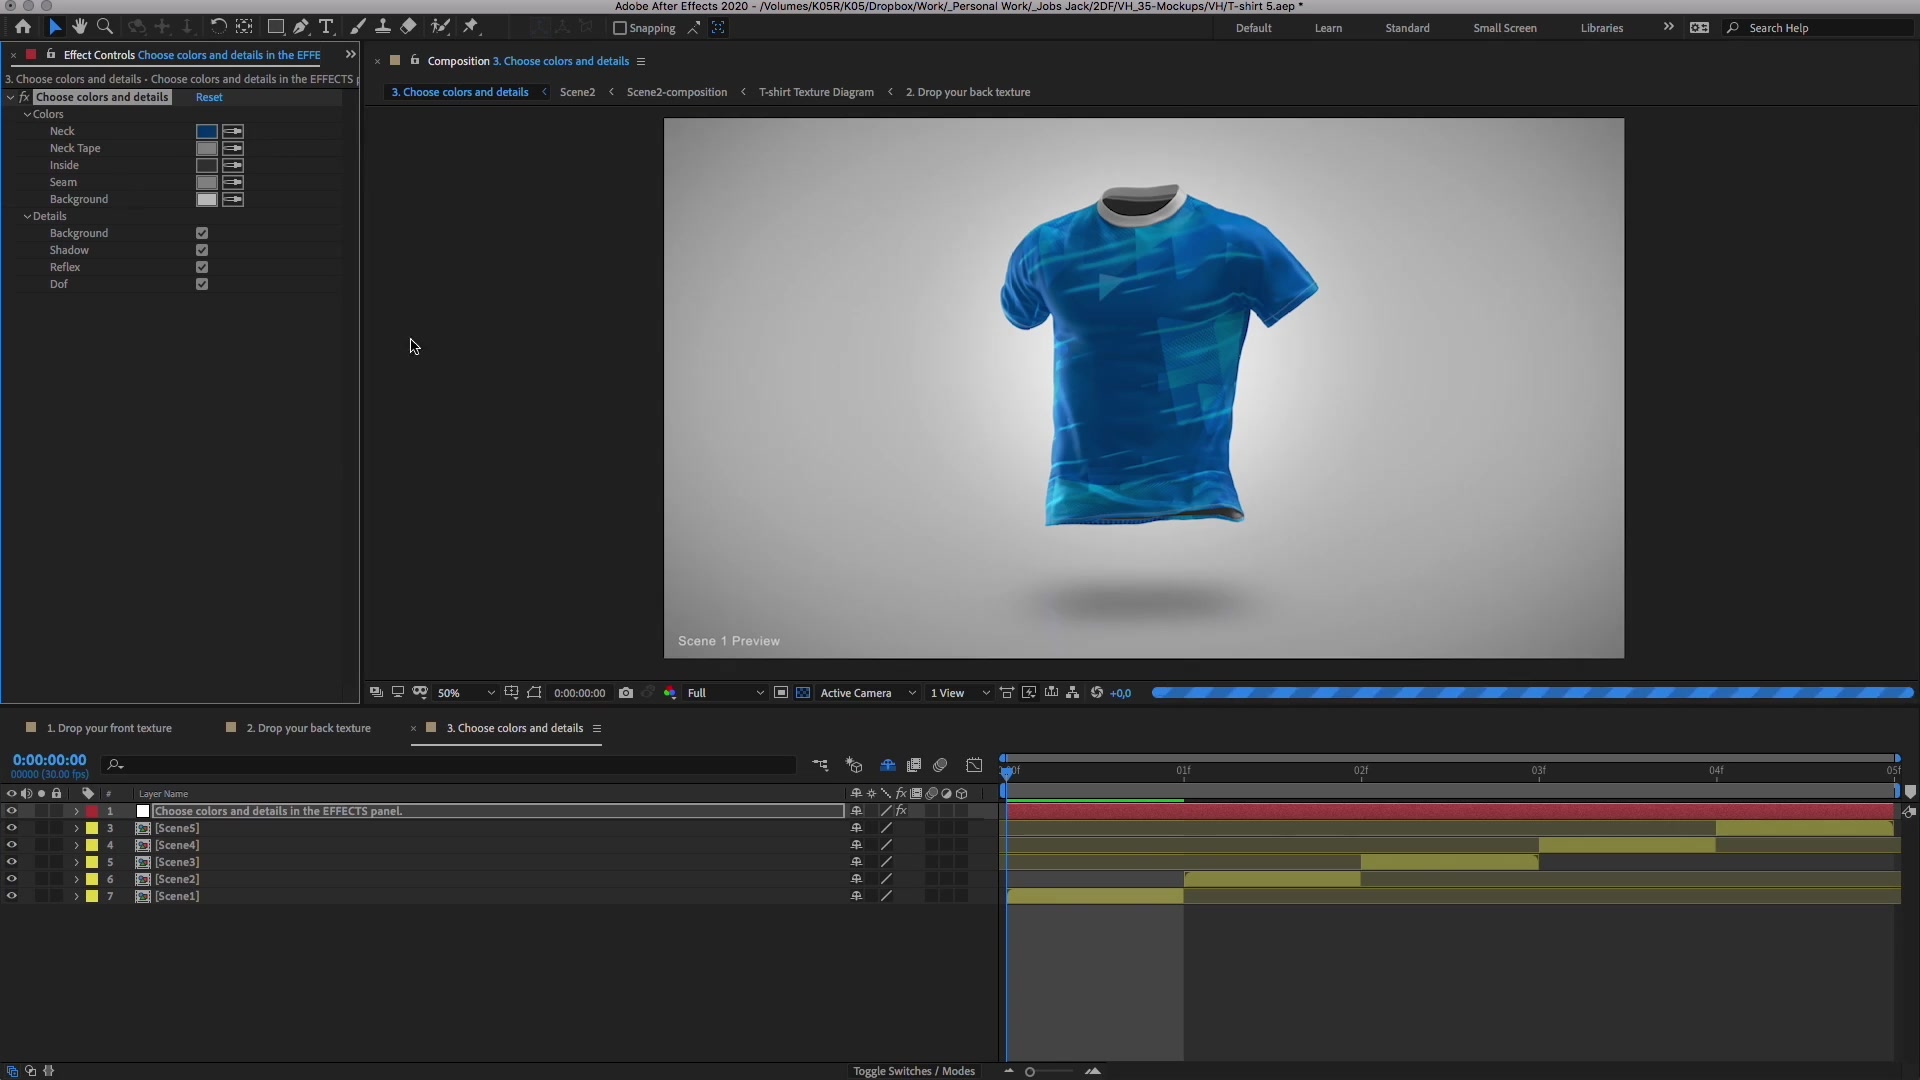 Download Animated Mockup Pro 360 Animated T Shirt Mockup Template Videohive 30892735 Download Quick After Effects